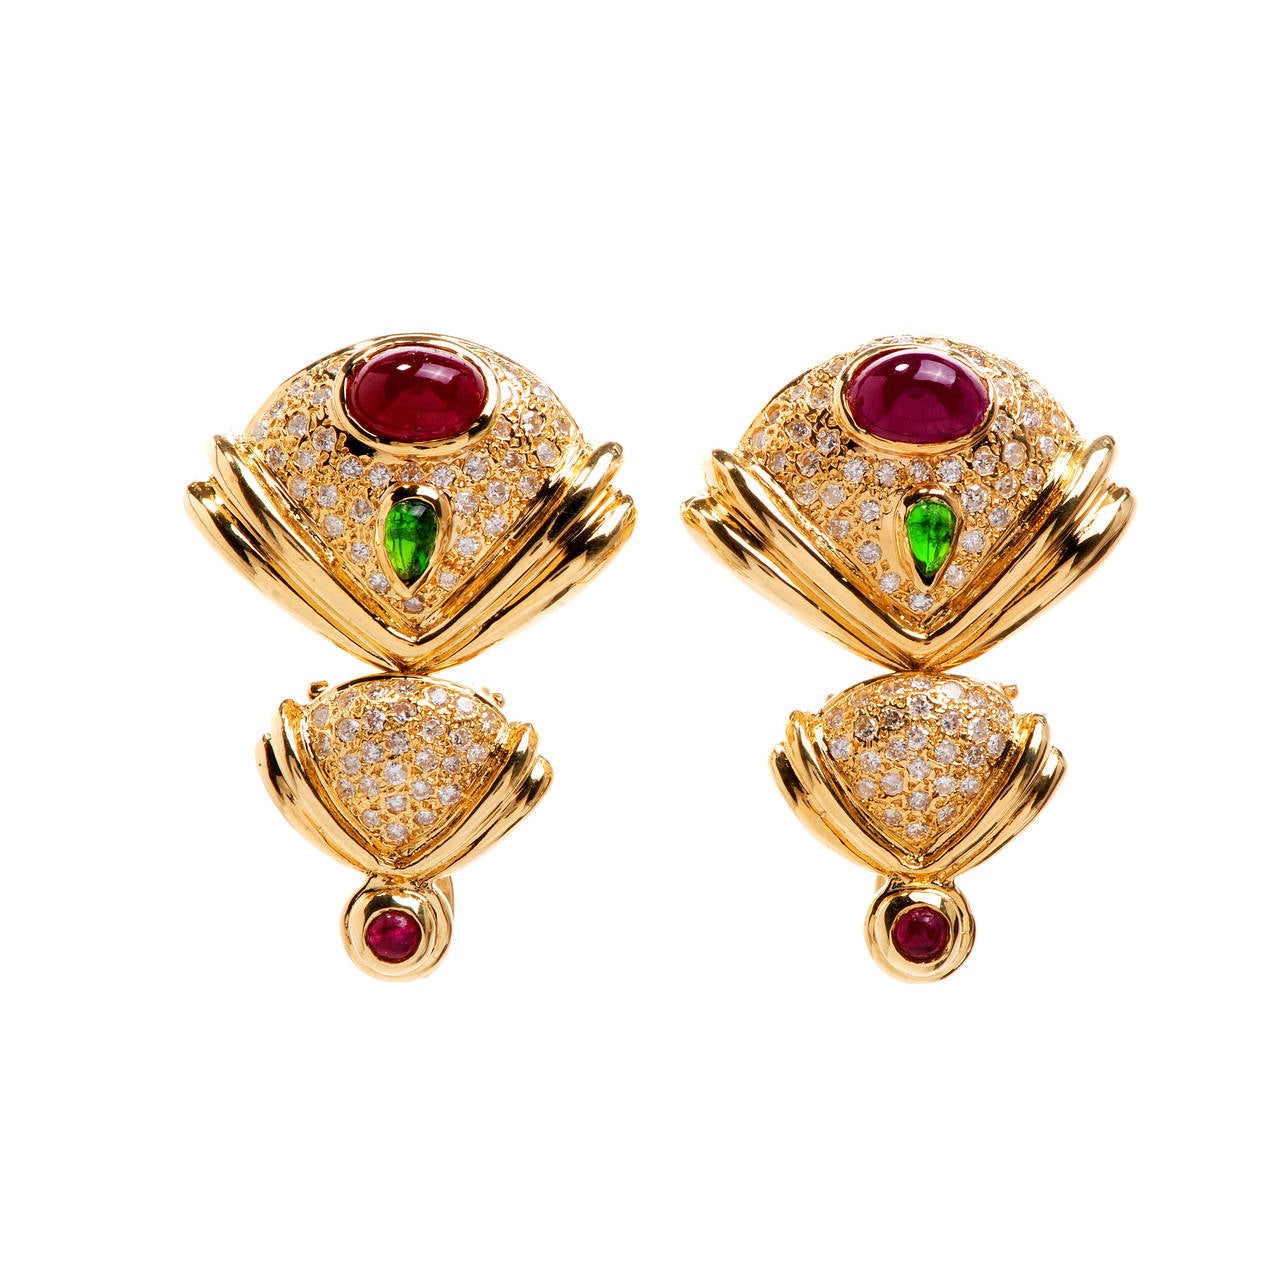 These stunning clip back drop earrings are crafted in solid 18K yellow gold. These earrings are accented with some 288 genuine round pave set diamonds approx 3.00 ct, H- I color, mostly VS1 clarity. These earrings are enhanced with 4 genuine round